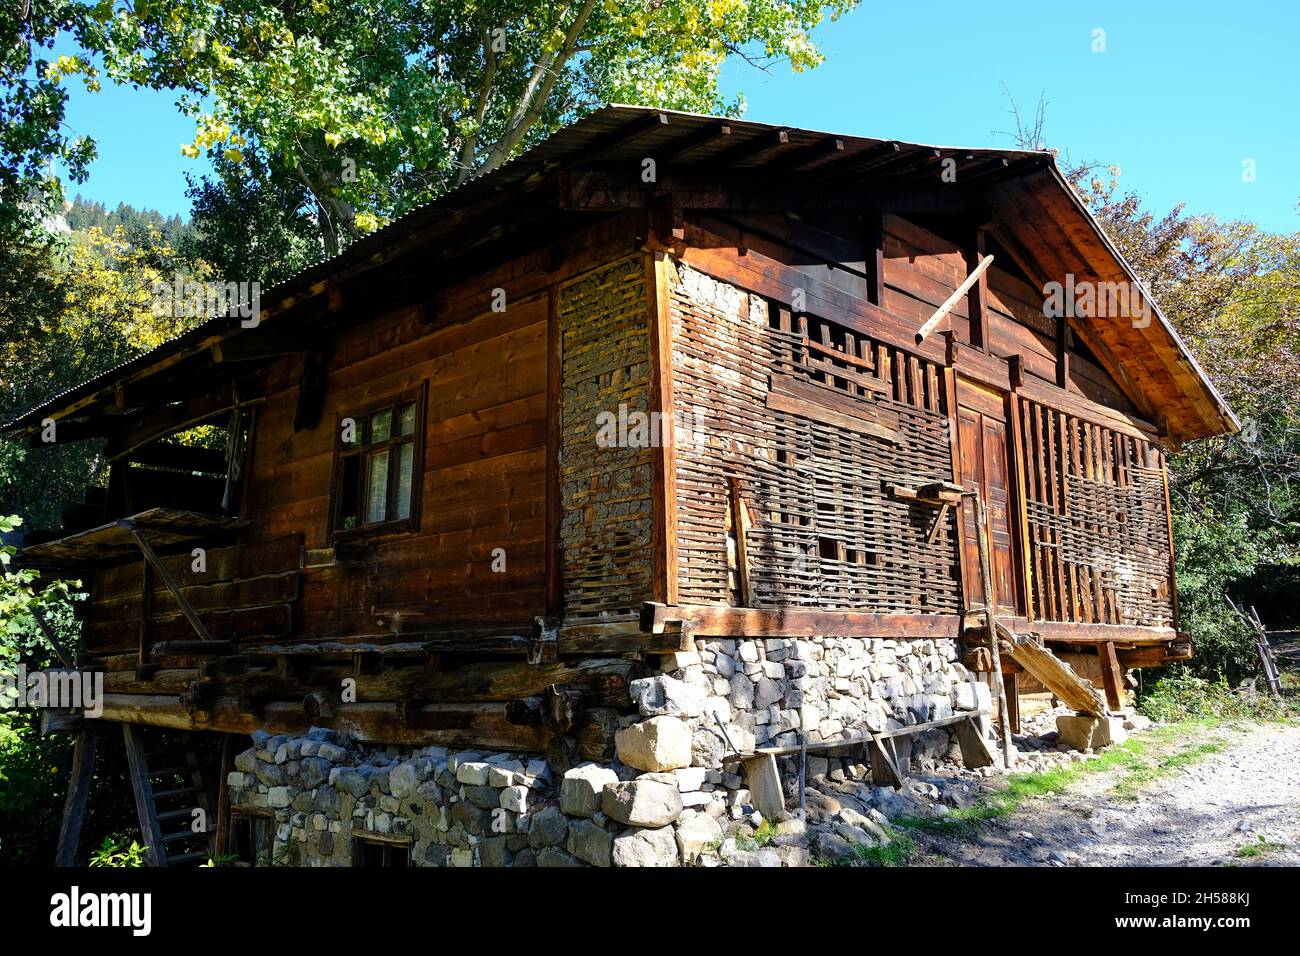 A traditional old wooden house in Ardanuç district of Artvin province Stock Photo